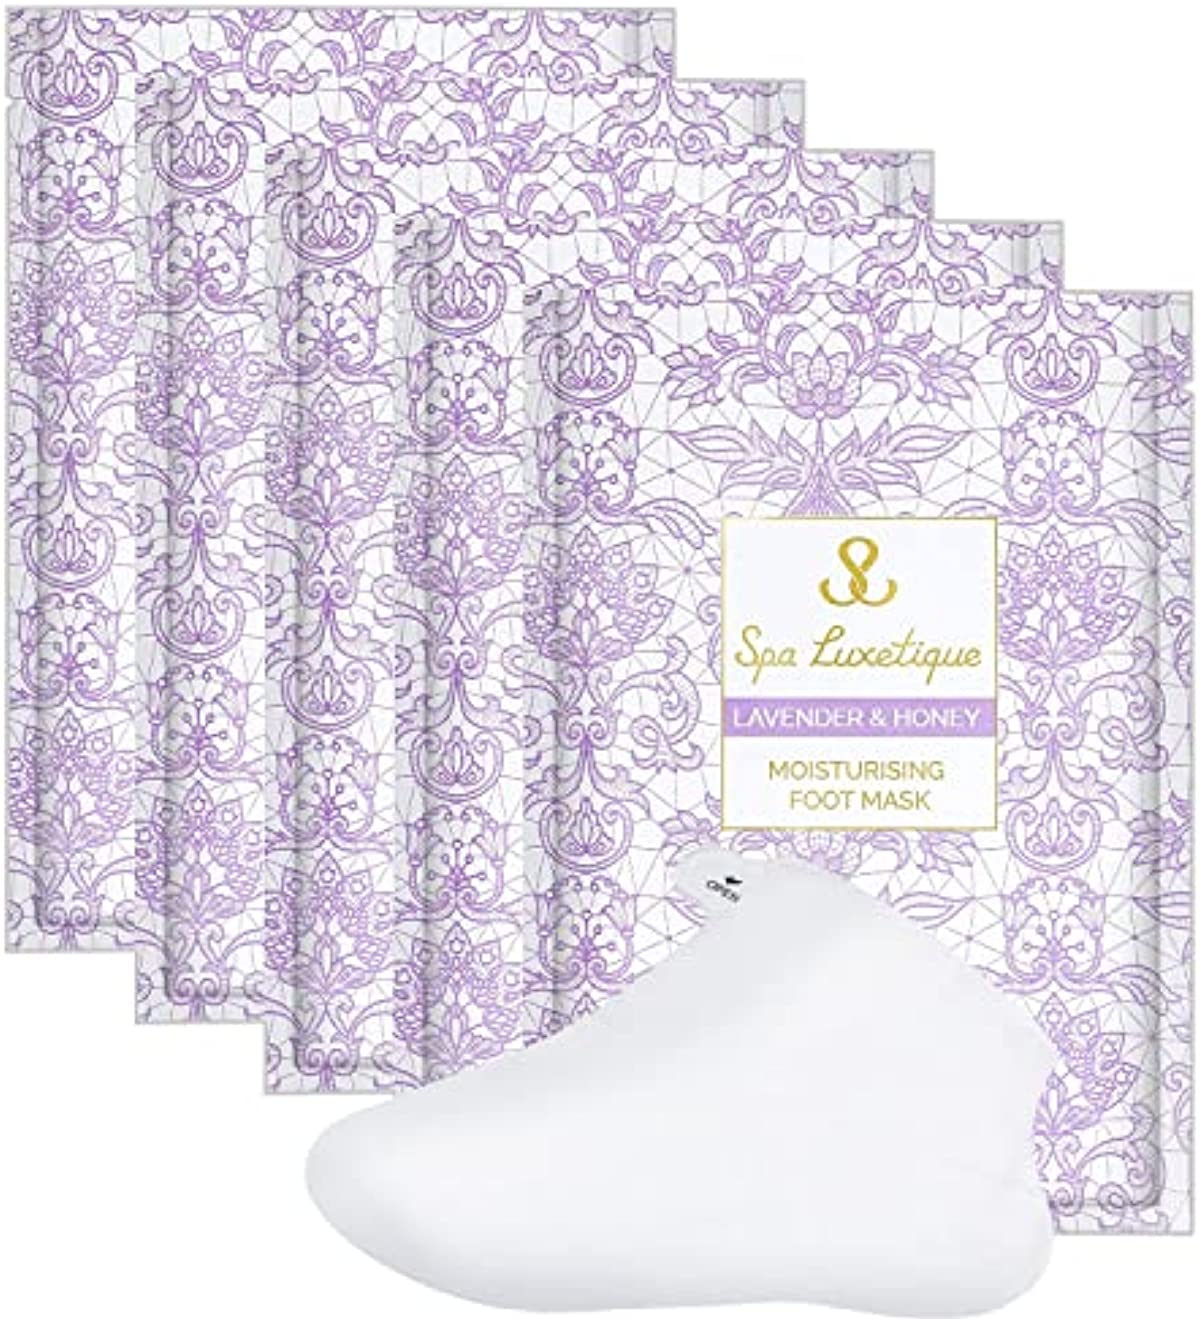 Foot Mask - 5 Pairs Lavender & Honey Foot Spa for Rough Dry Cracked Feet Reduce Dead Skin, Moisturizing Socks for Baby Foot, Relaxing Soft Feet Treatment for Women & Men, Fathers Day Foot Care Gifts